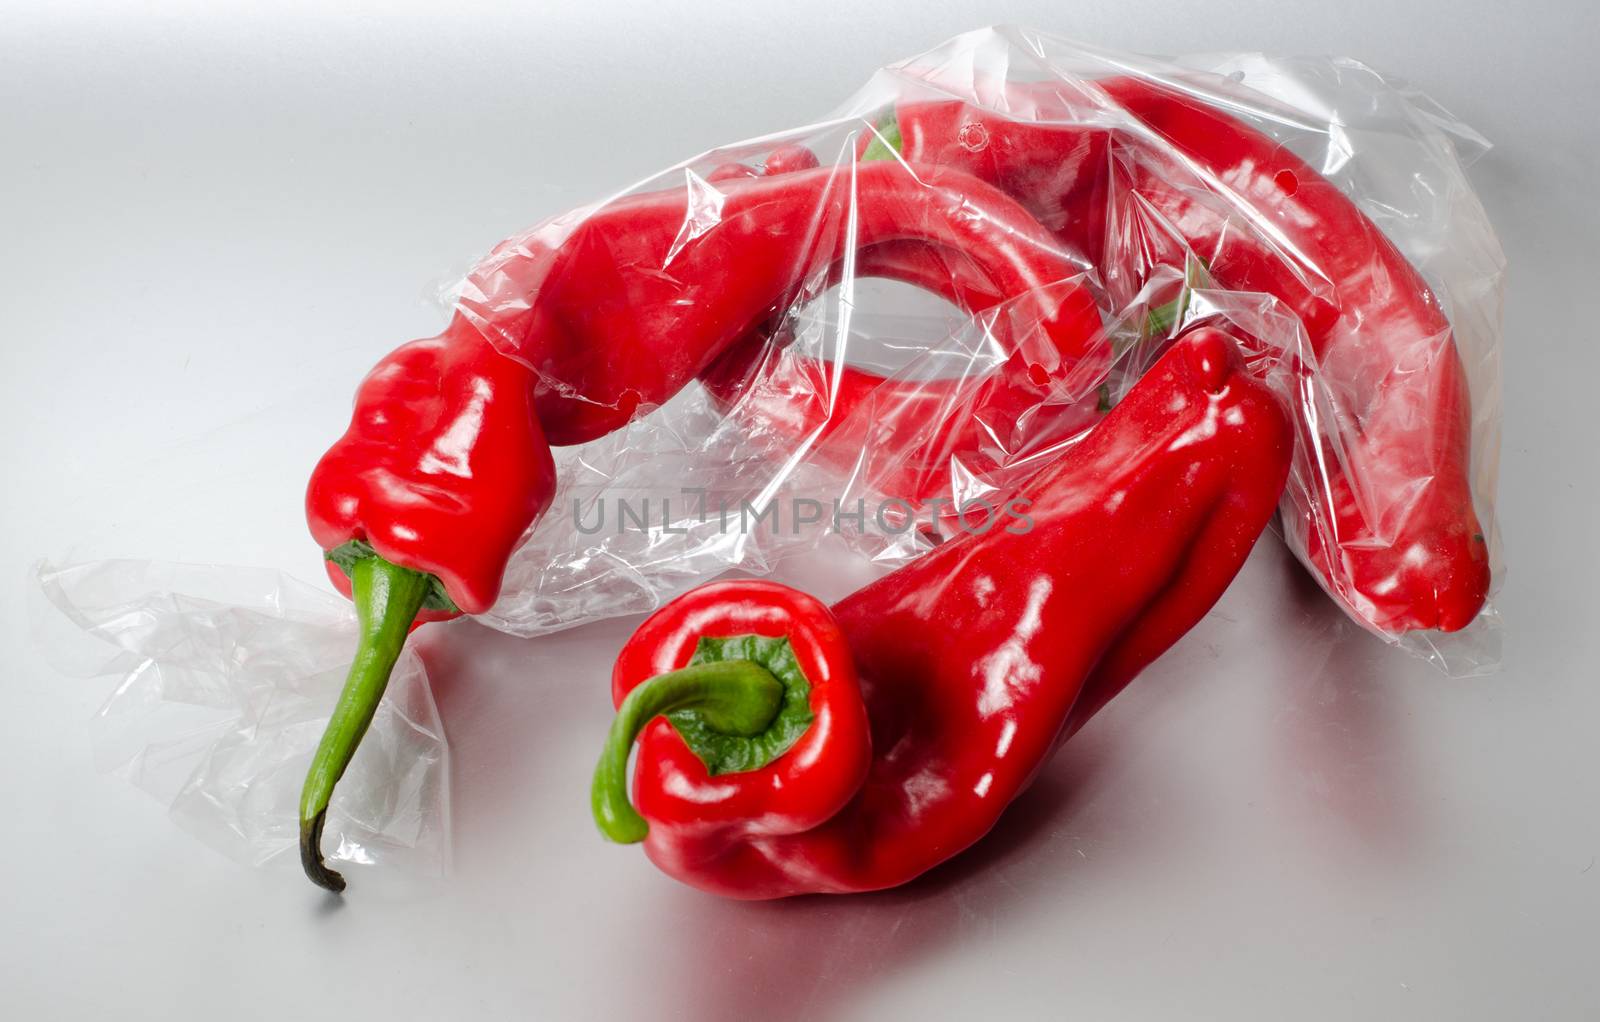 bag of peppers by sarkao